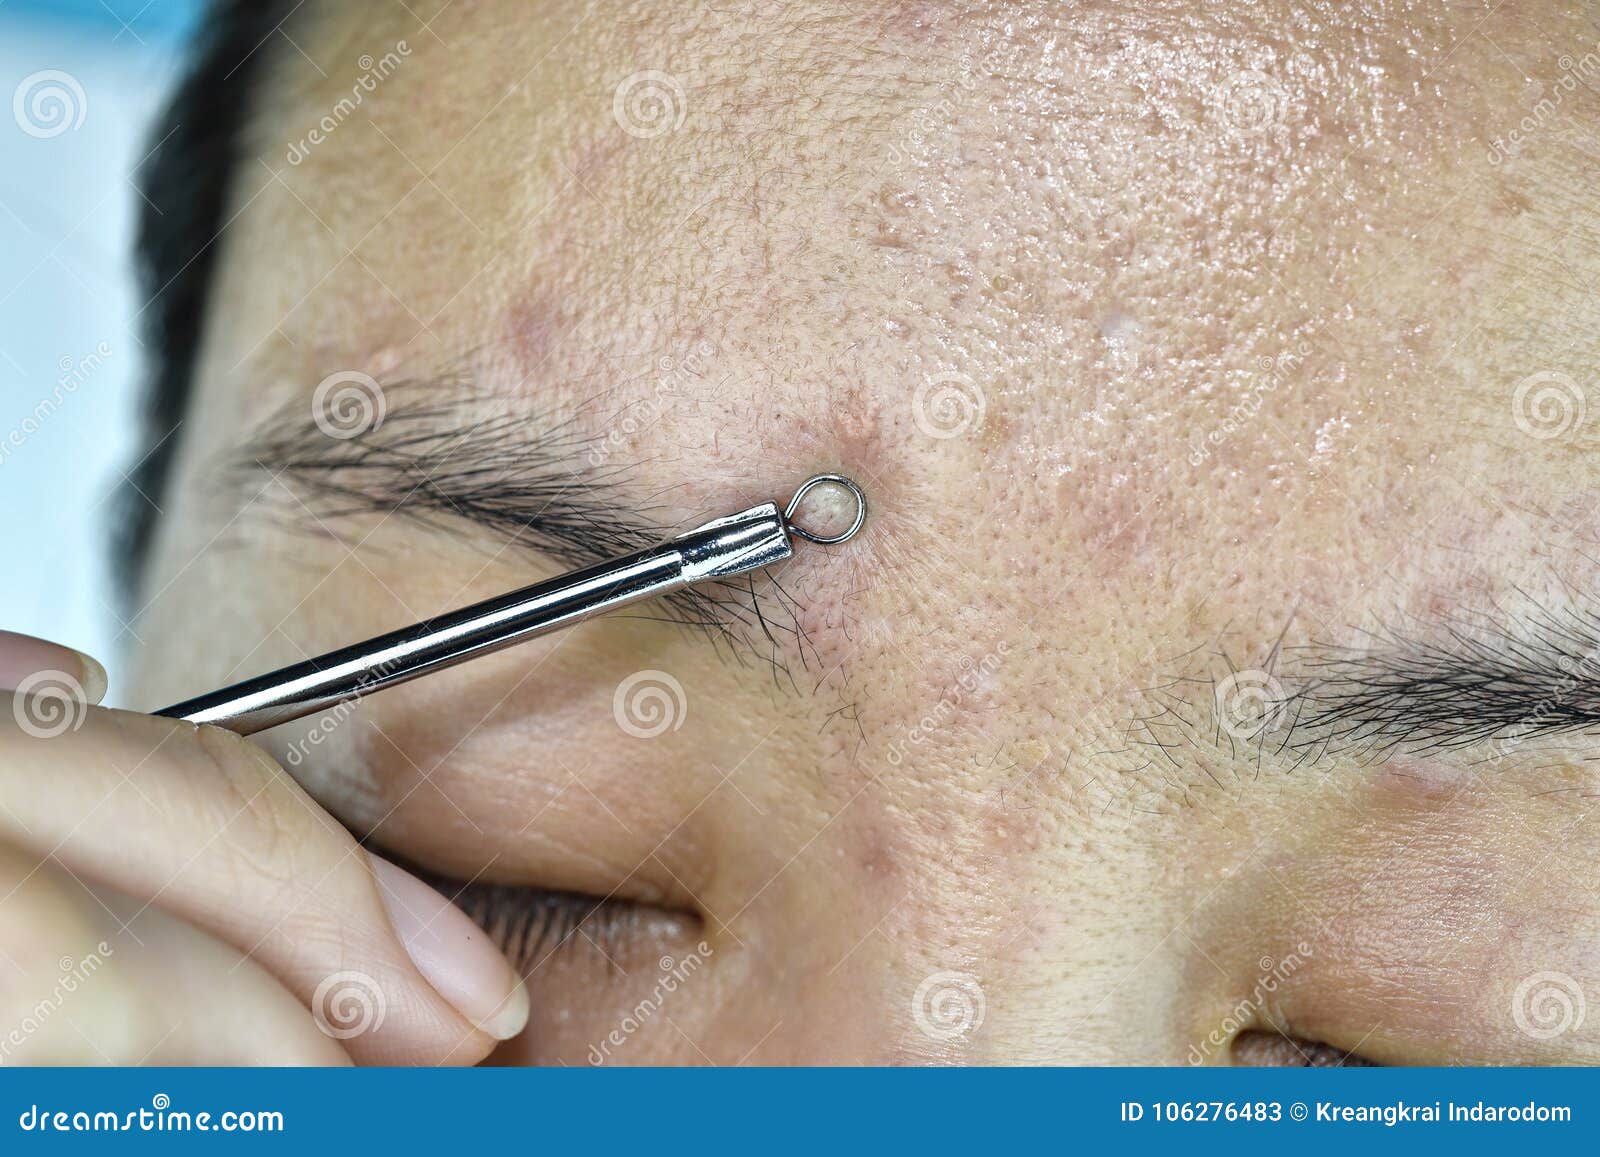 skin problem with acne diseases, close up woman face squeezing whitehead pimples with acne removal tool.